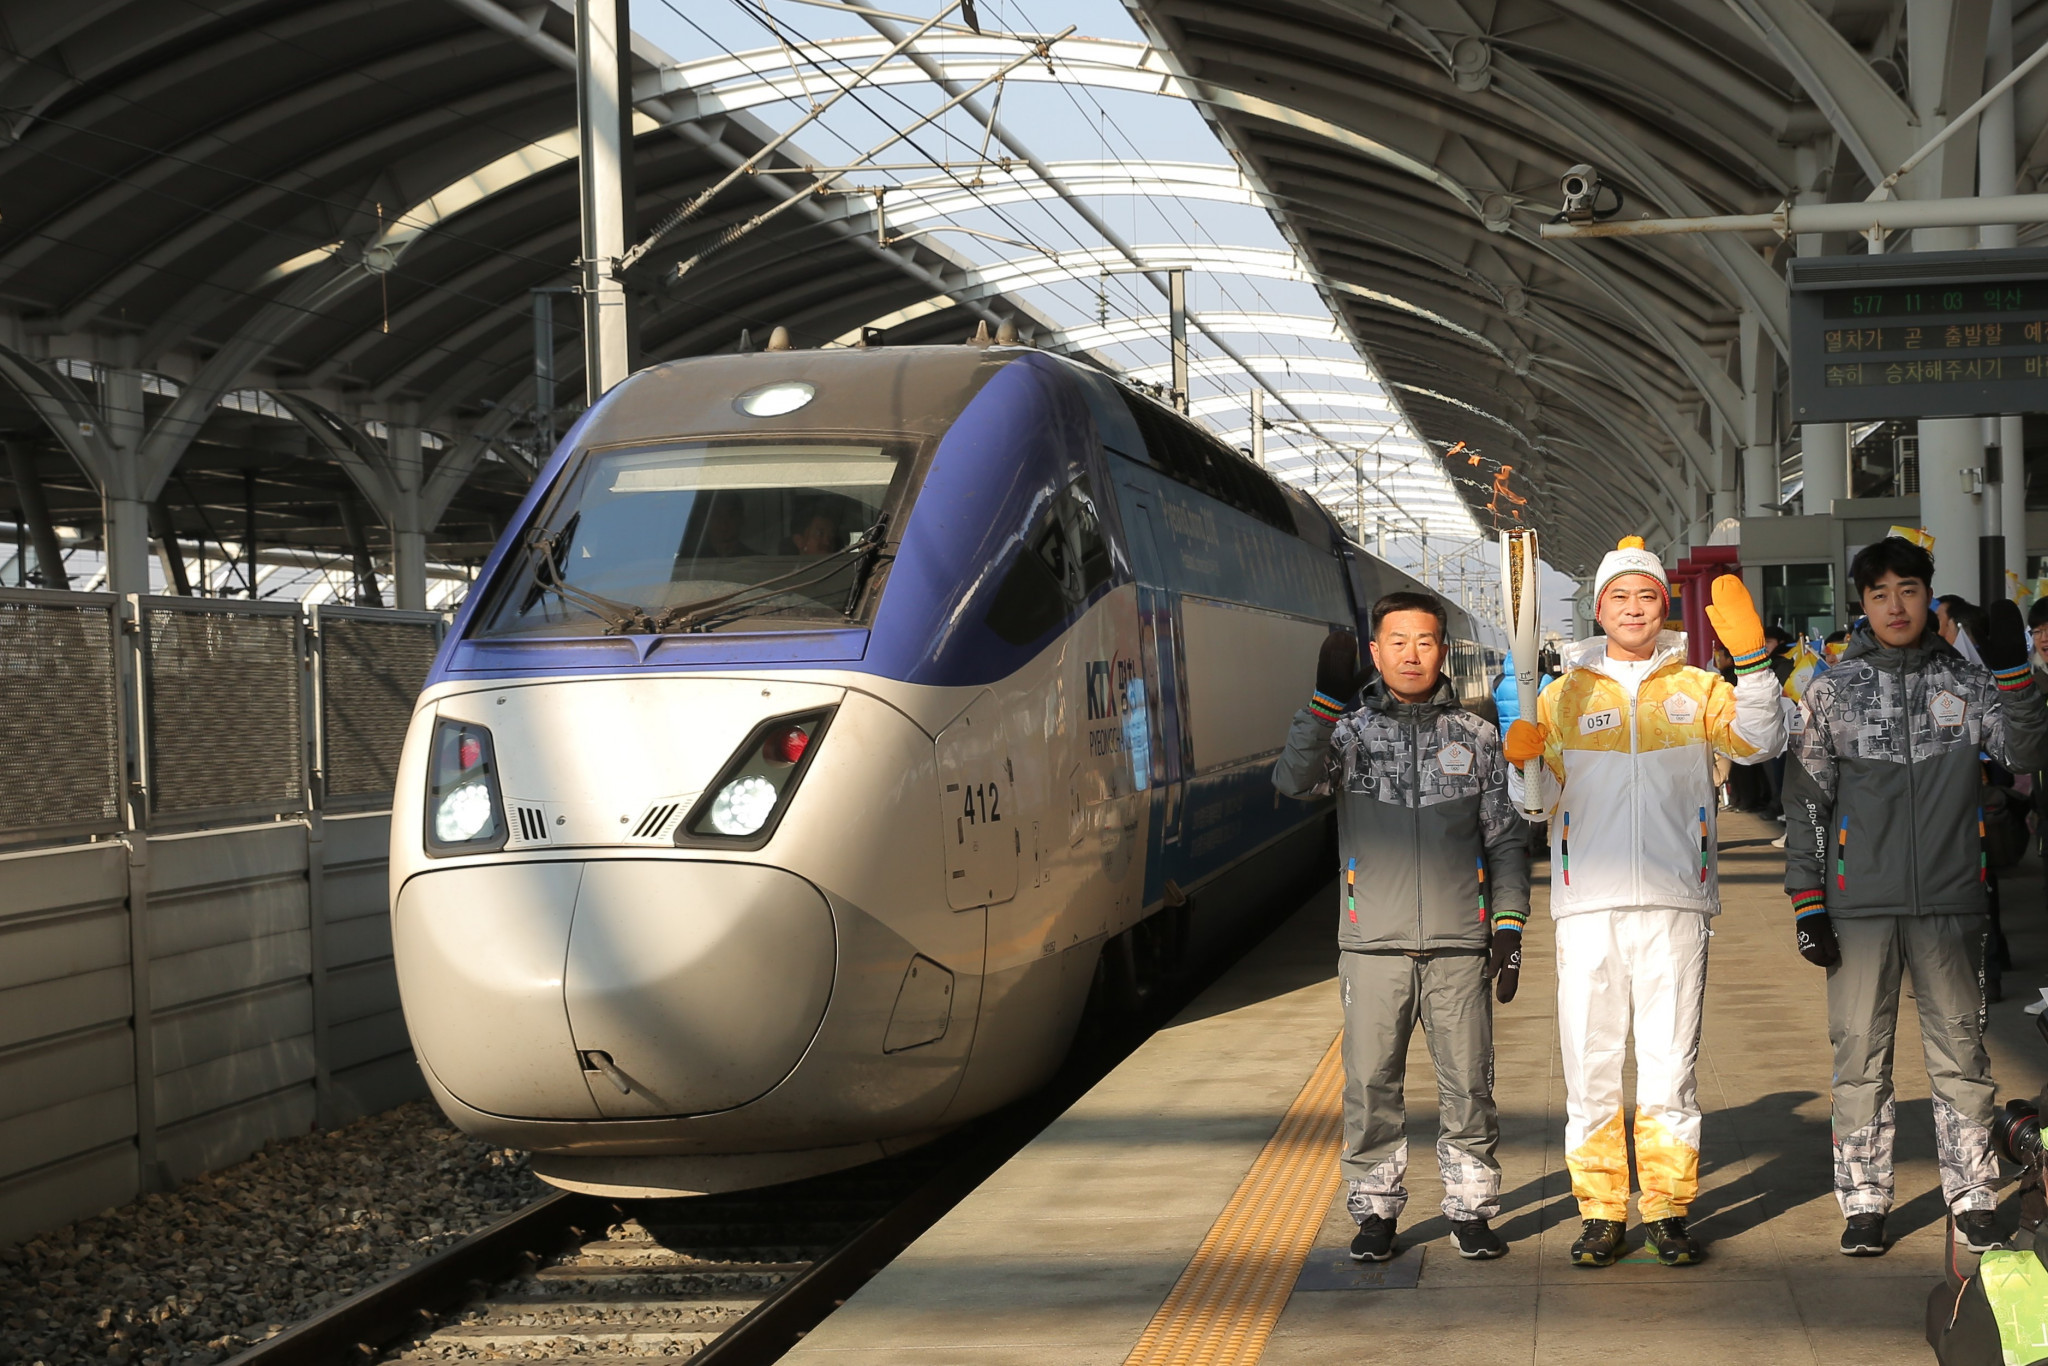 Torch speeds at 300 kilometres an hour aboard a super-fast train and visits the Land That Time Forgot